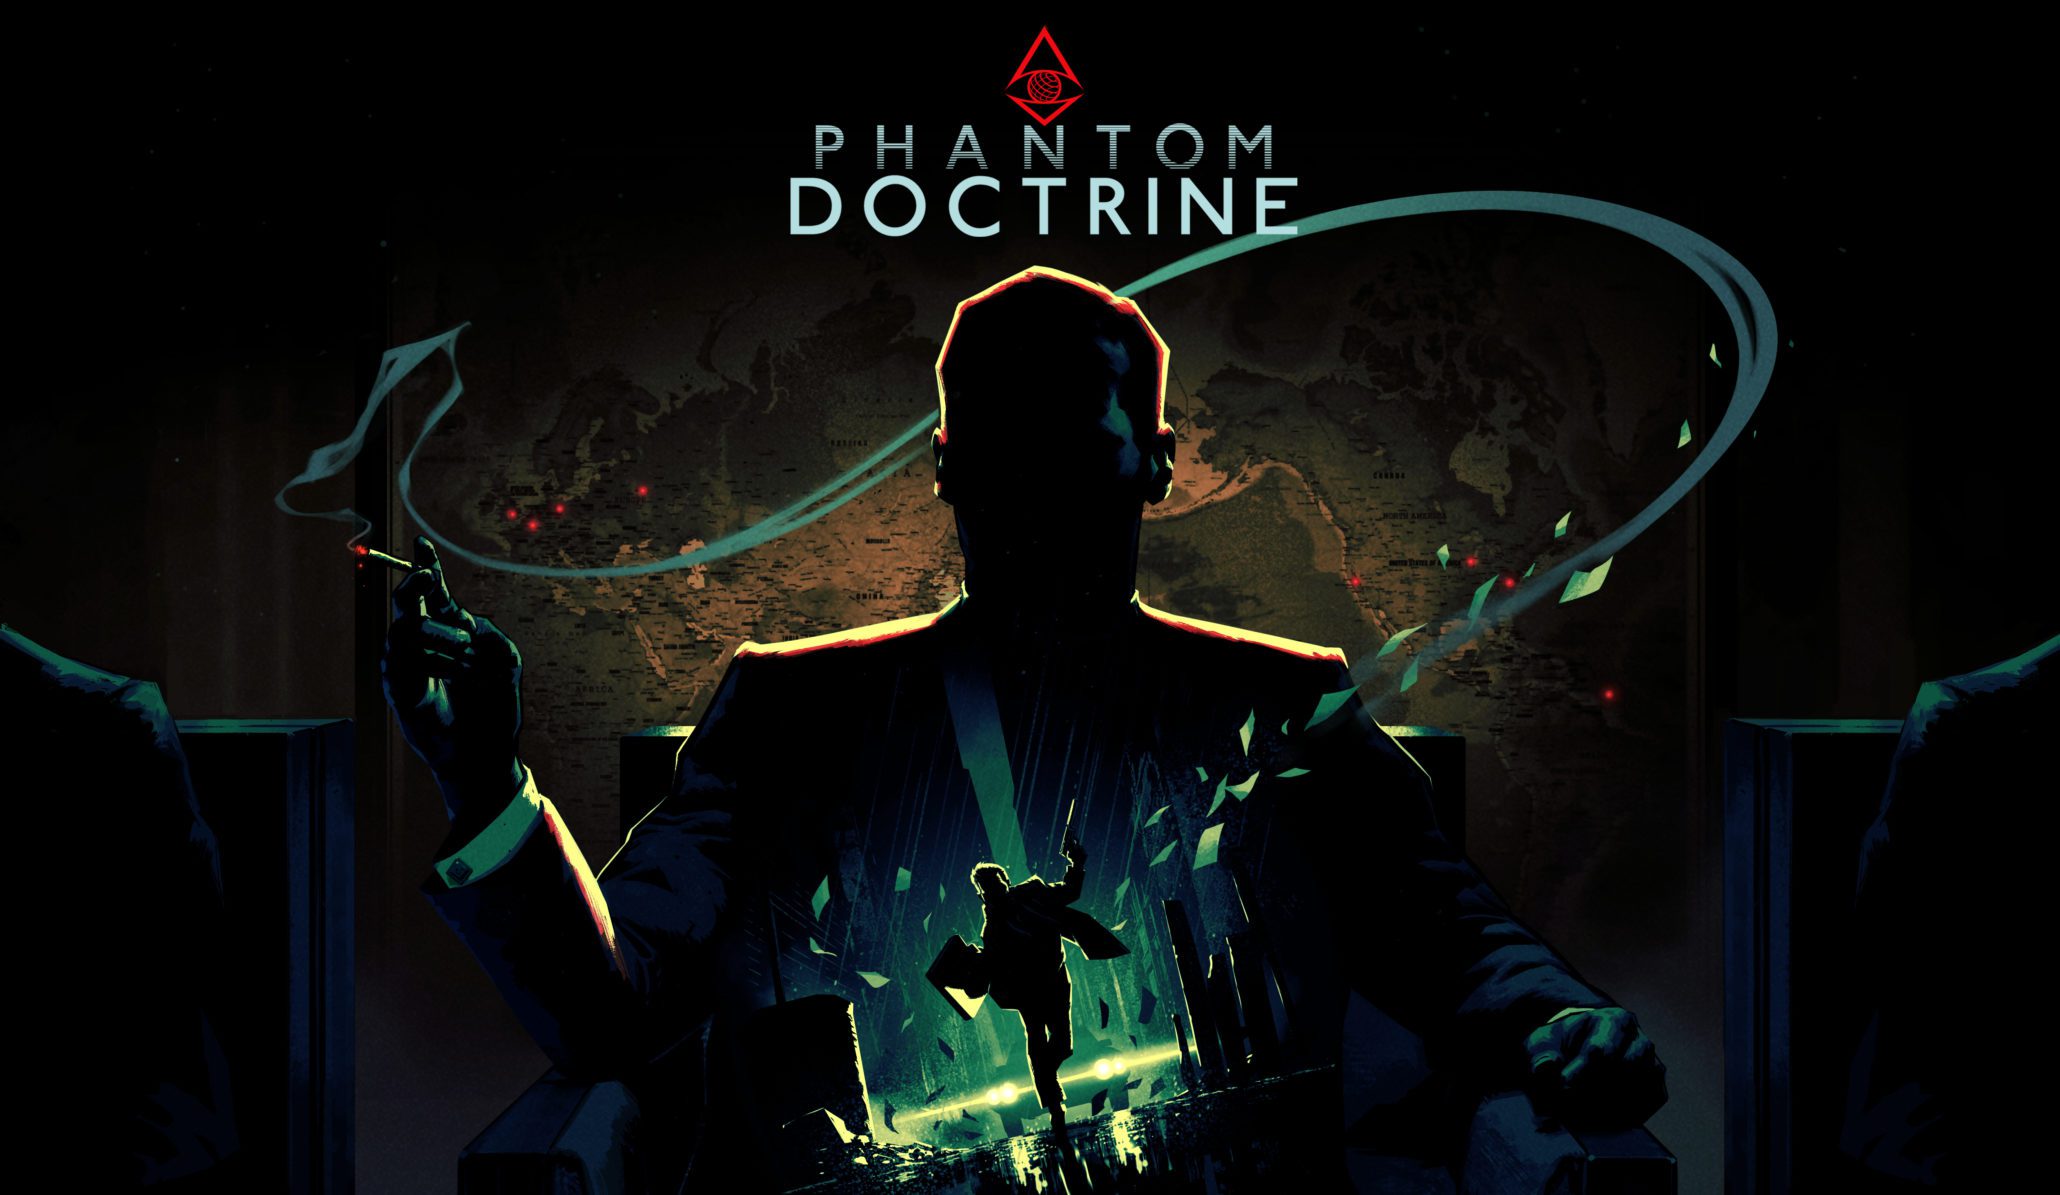 Cold War strategy game Phantom Doctrine is out today